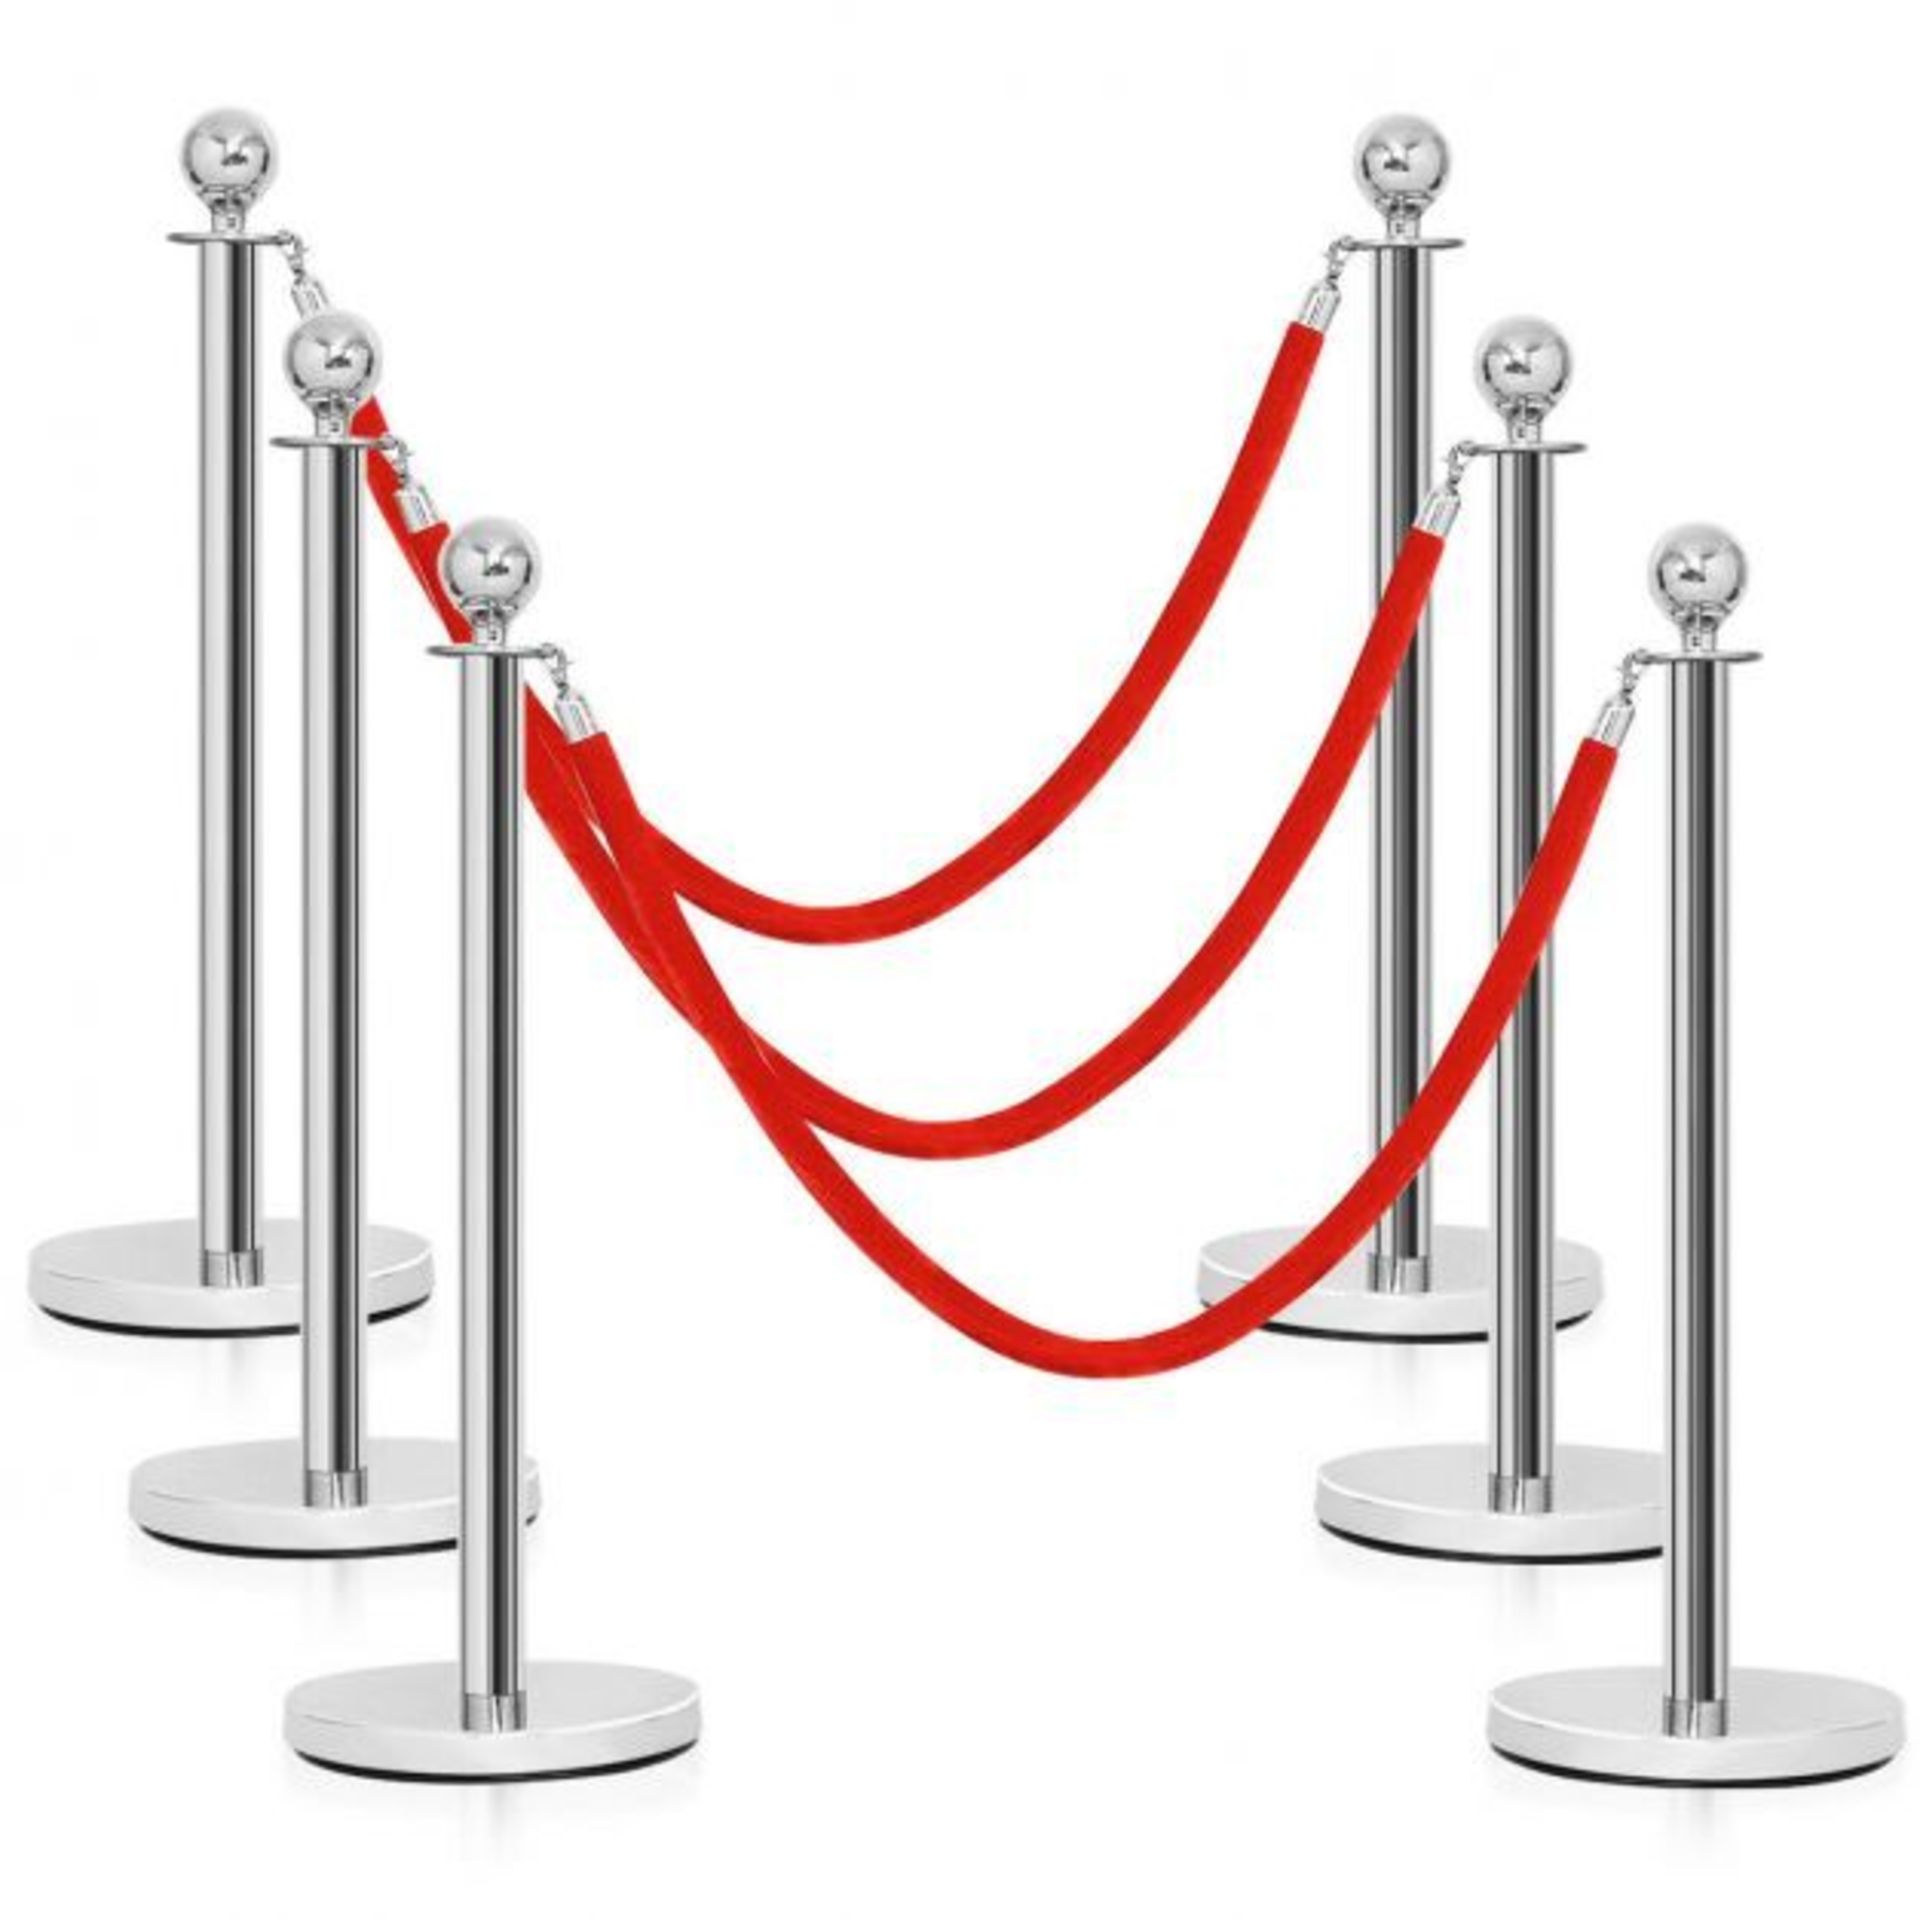 6pc Polished Steel Stanchion with Red Velvet Ropes 1.5m. - SR41. Rope stanchions are regularly